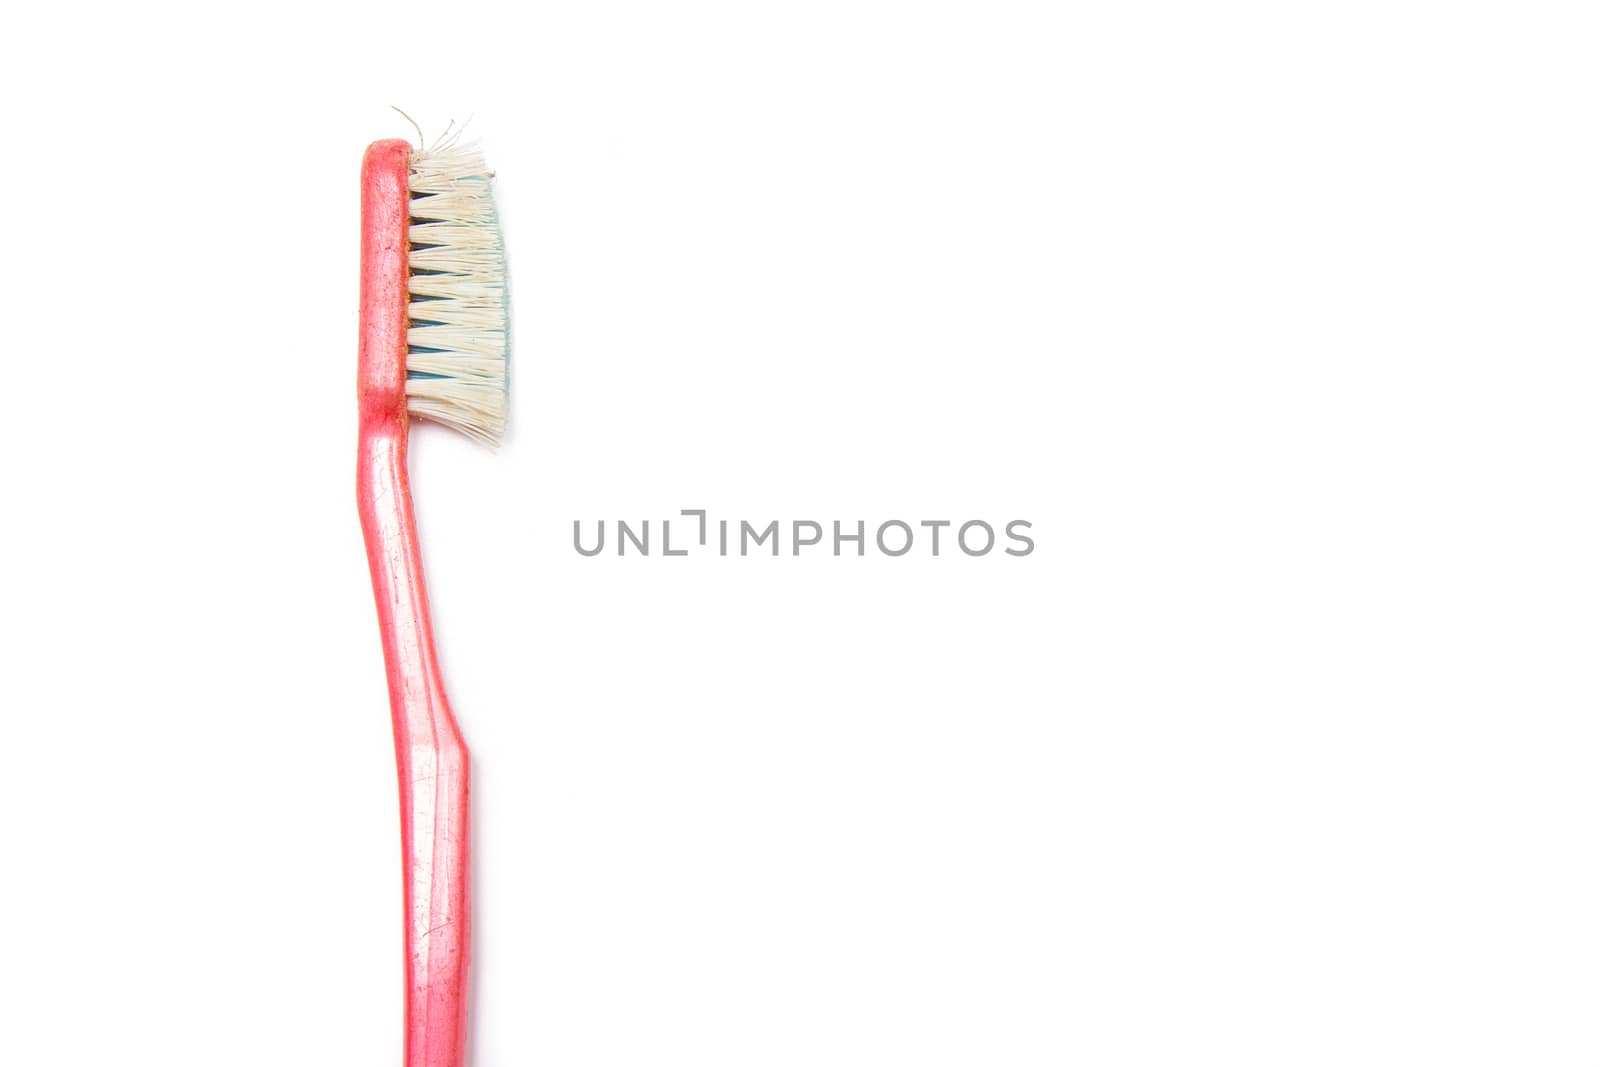 old toothbrush isolated on white background